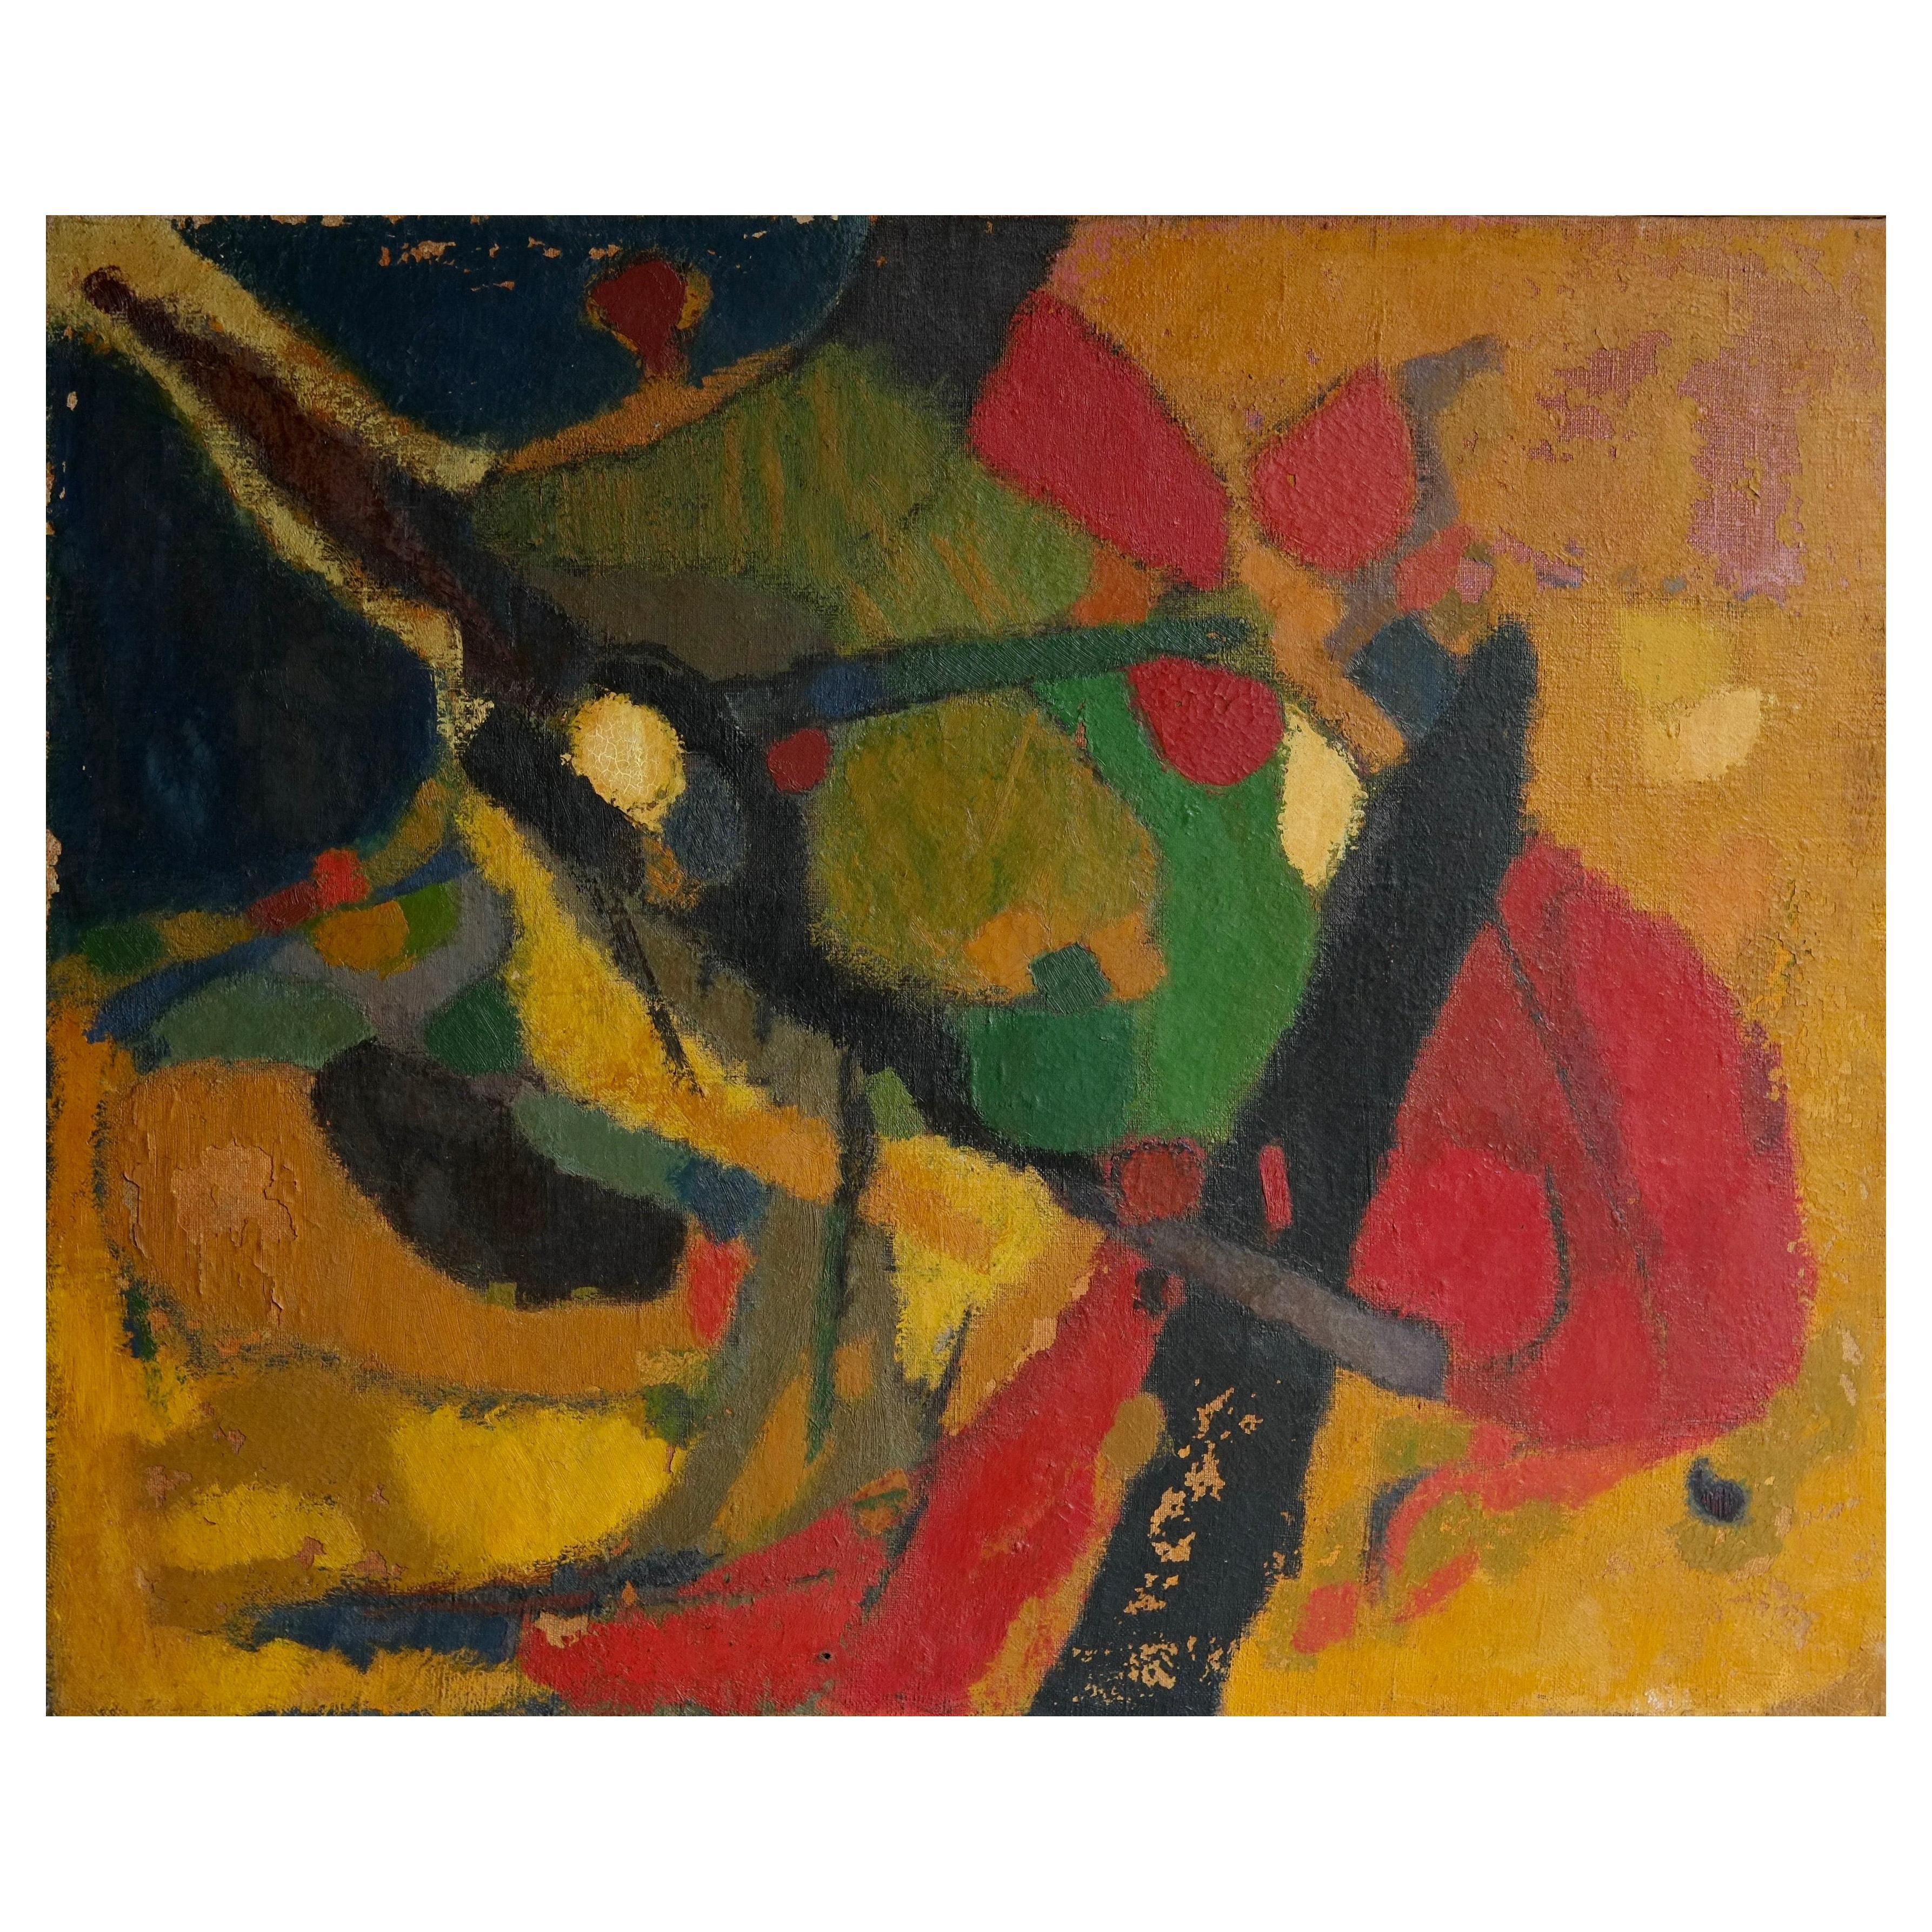 Early 20th Century, French, Abstract Oil on Canvas